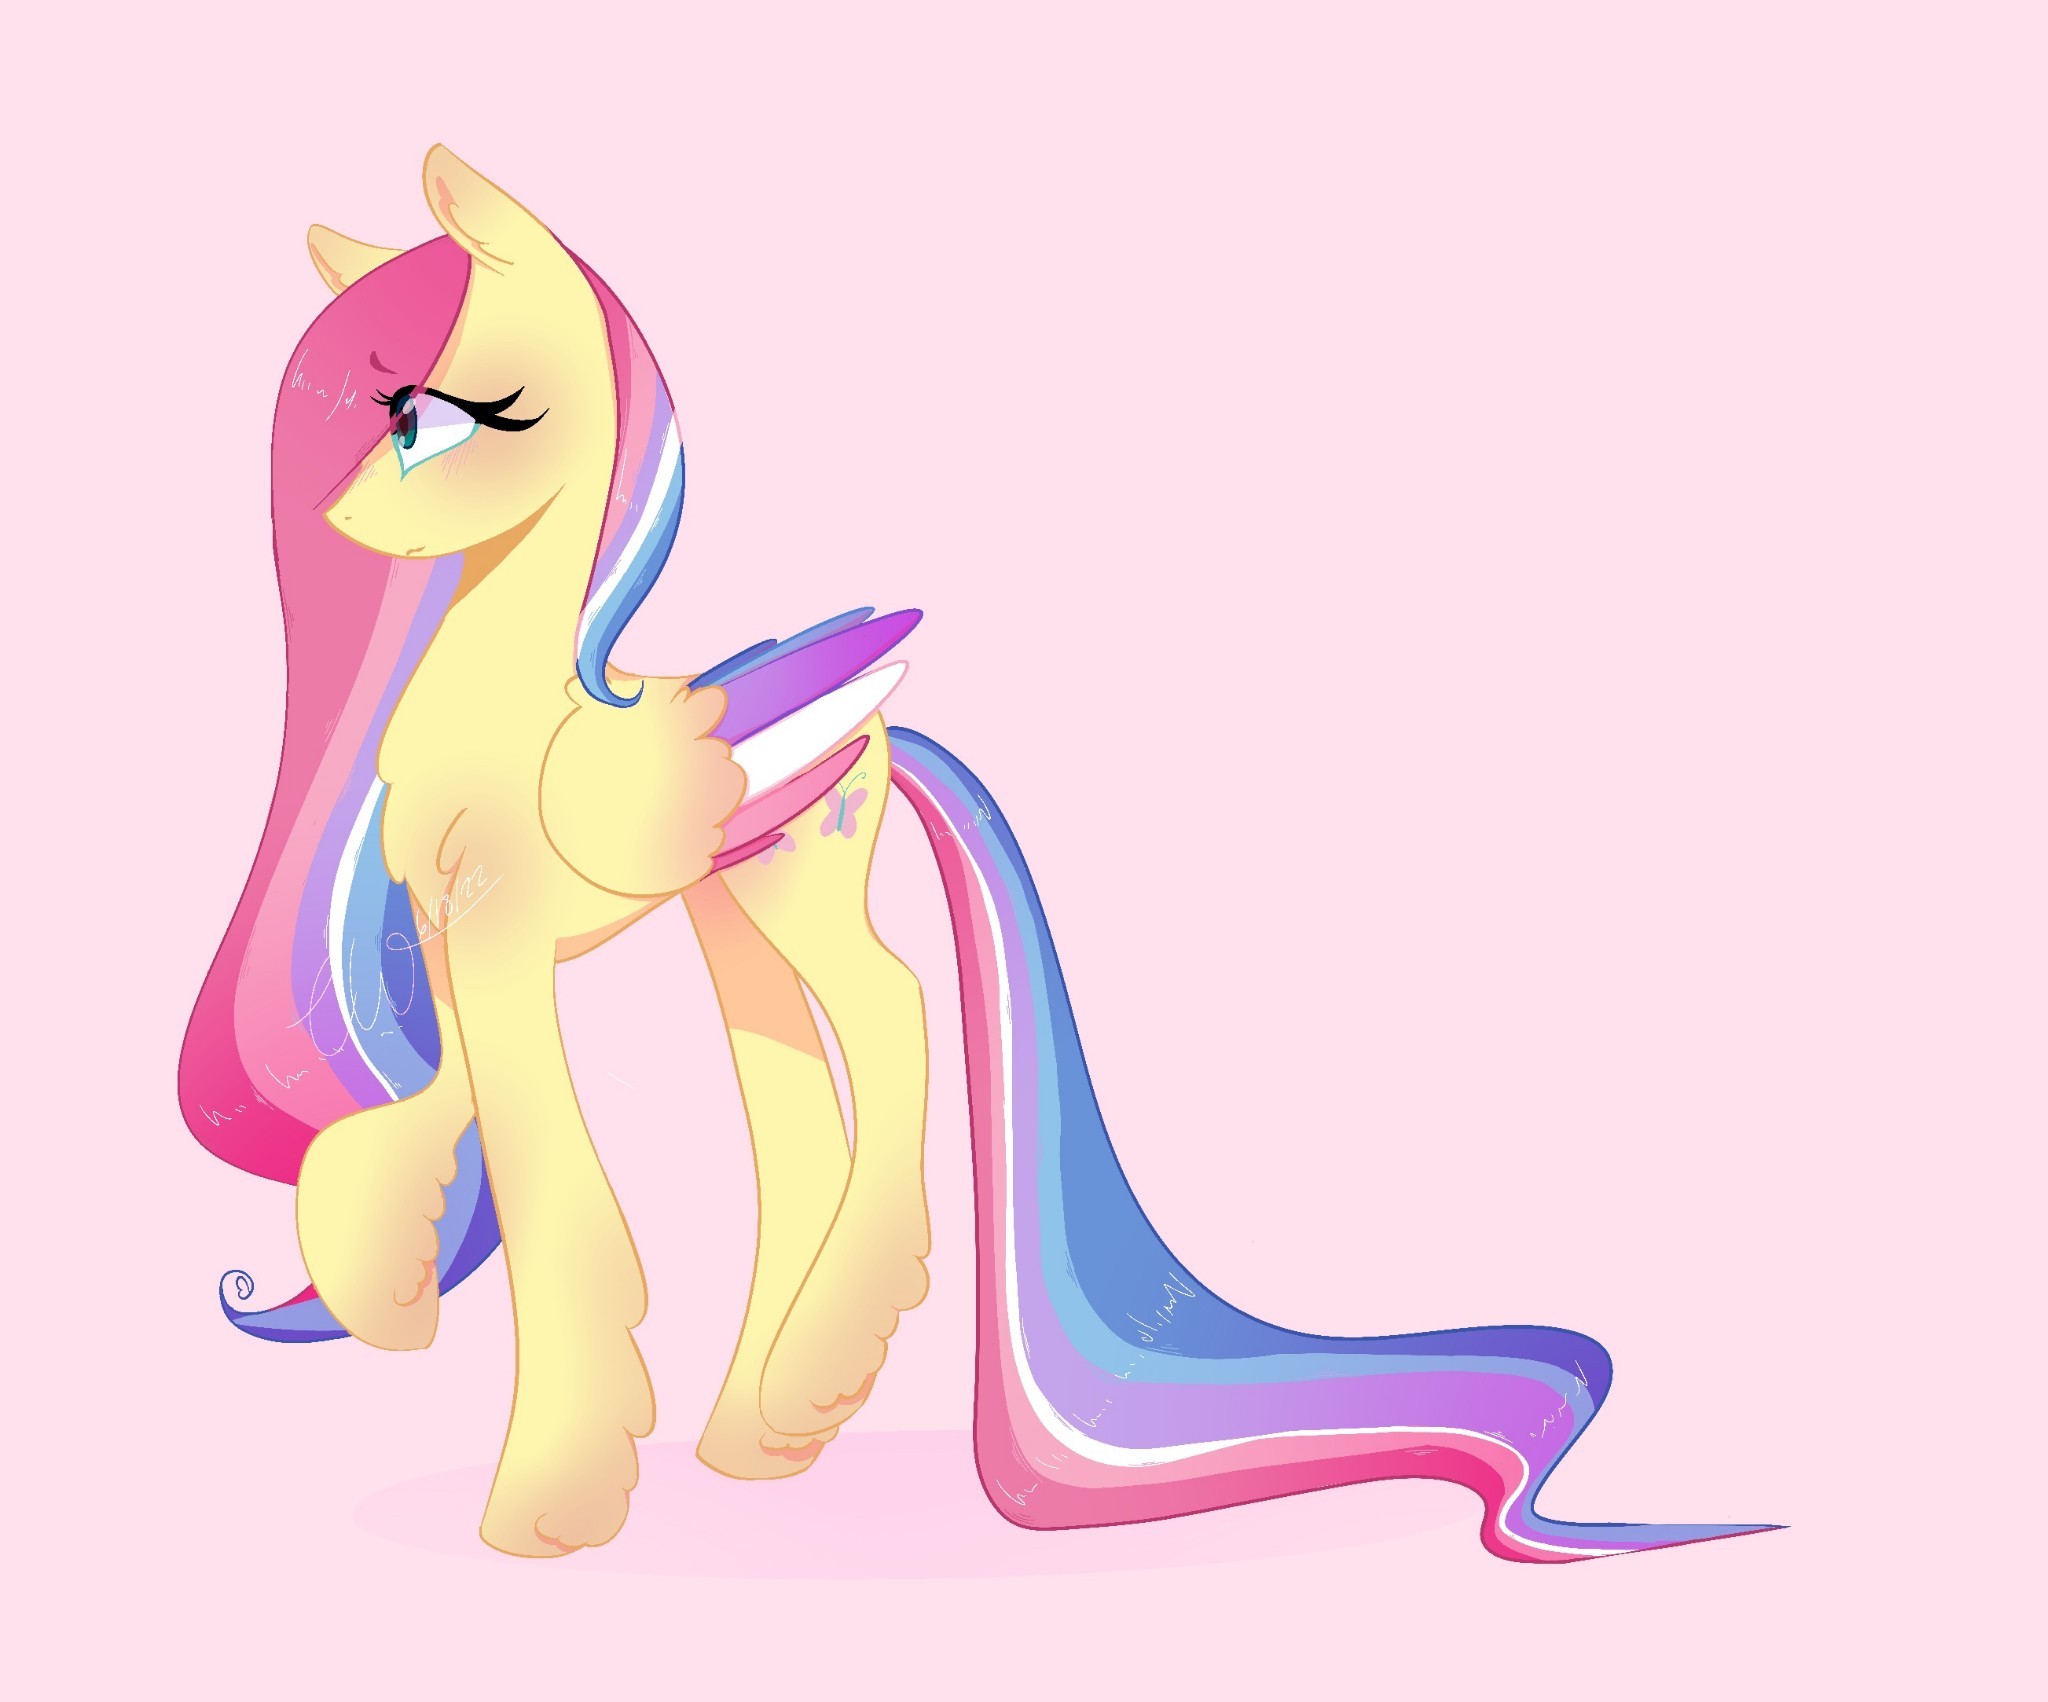 chrysaliswife:♡♡♡♡♡ ♡♡♡Here’s the next addition to the mlp pride parade! Carrying the inclusive lgbt flag flying ahead is nonbinary rainbow dash and on the ground is fluttershy with the bigender flag!We’ve only got 2 of the